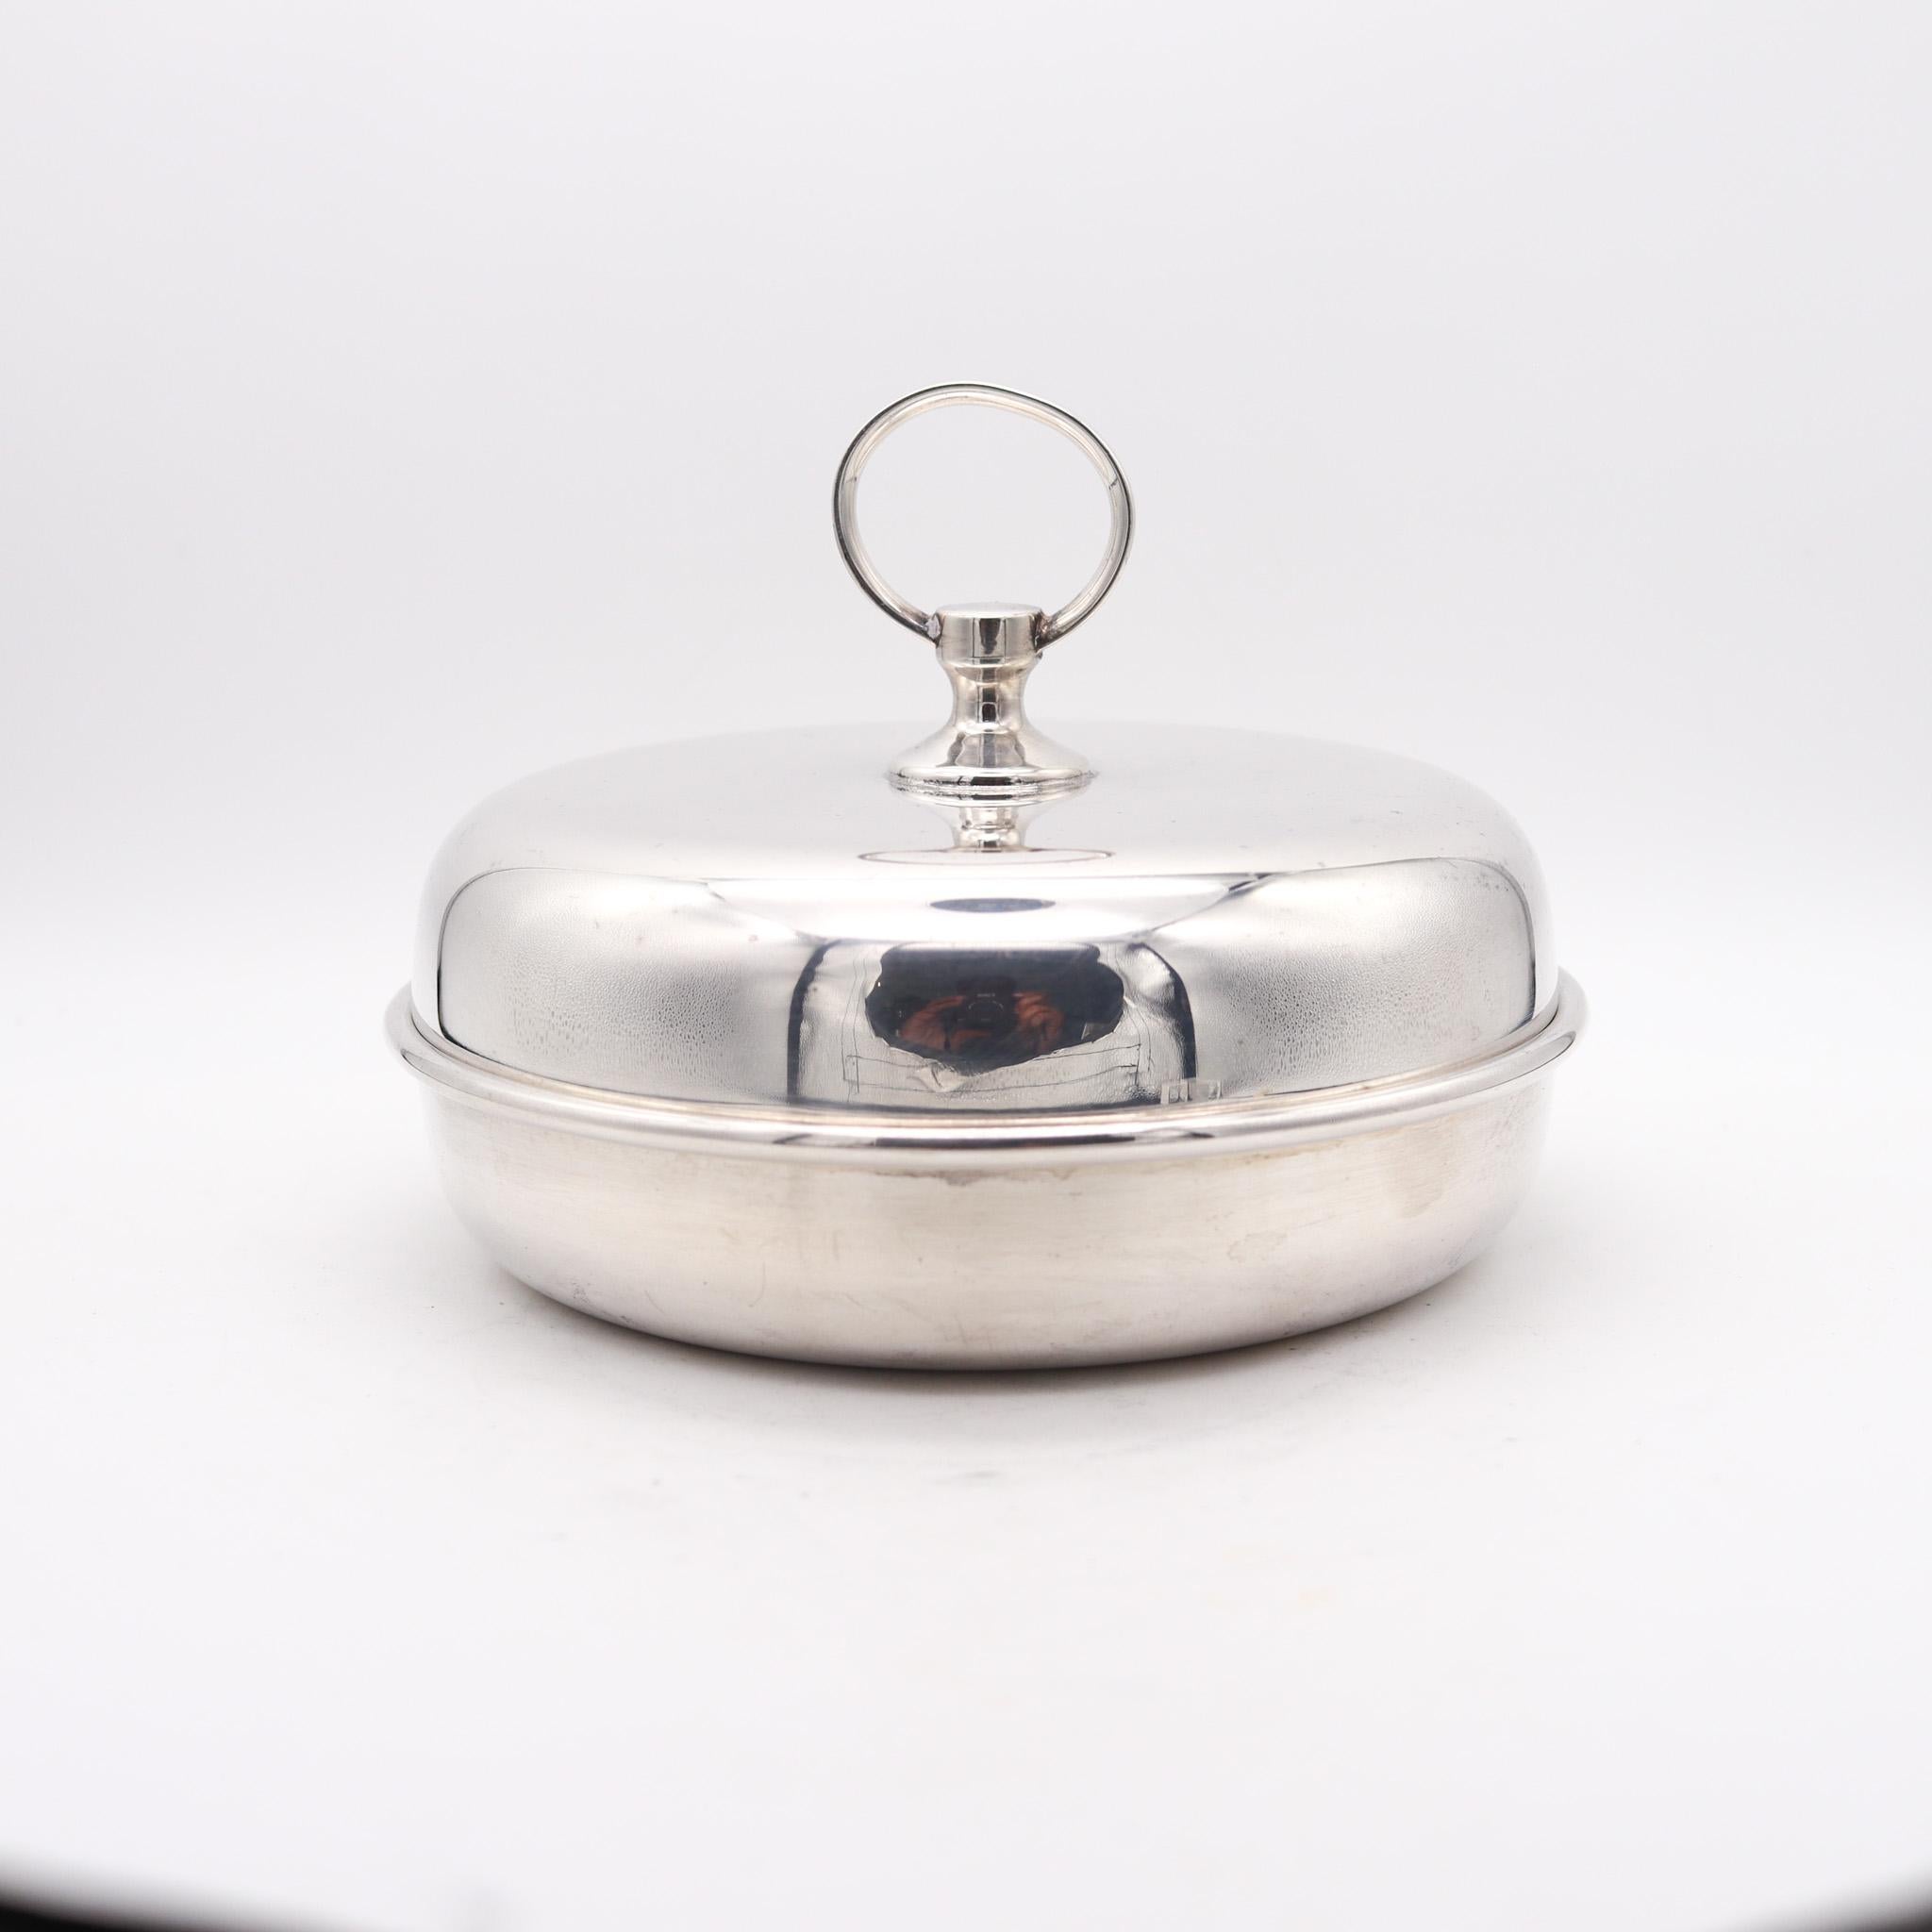 Round covered dish designed by Hermes.

This is a very beautiful and highly decorative piece, created in Paris France by the luxury house of Hermes, back in the 1960. This useful desk covered dish is very rare and a highly collectible item. Has been